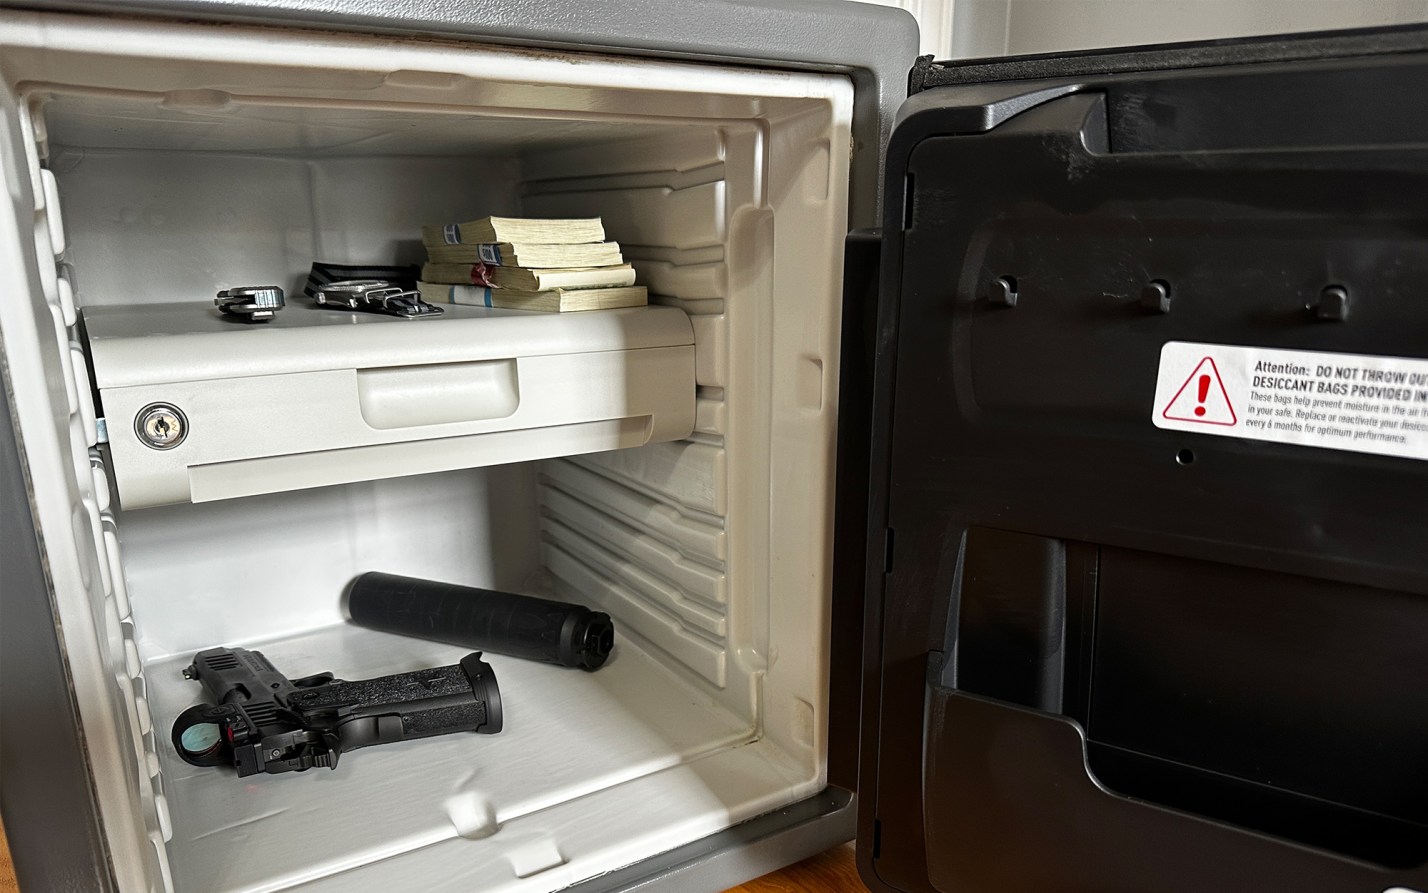 We reviewed the best home safes.